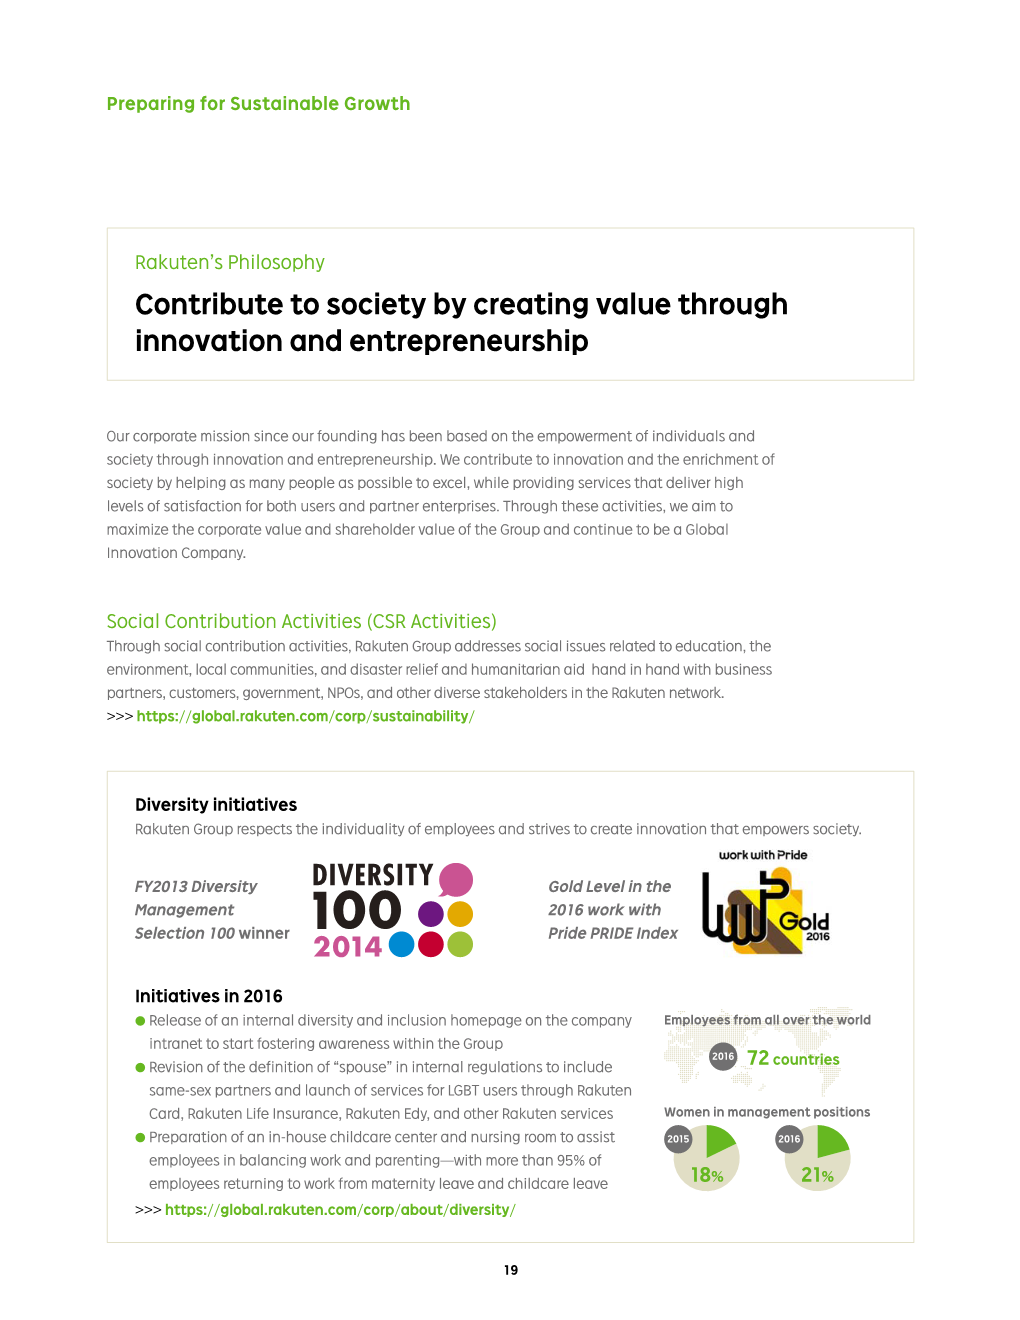 Contribute to Society by Creating Value Through Innovation and Entrepreneurship